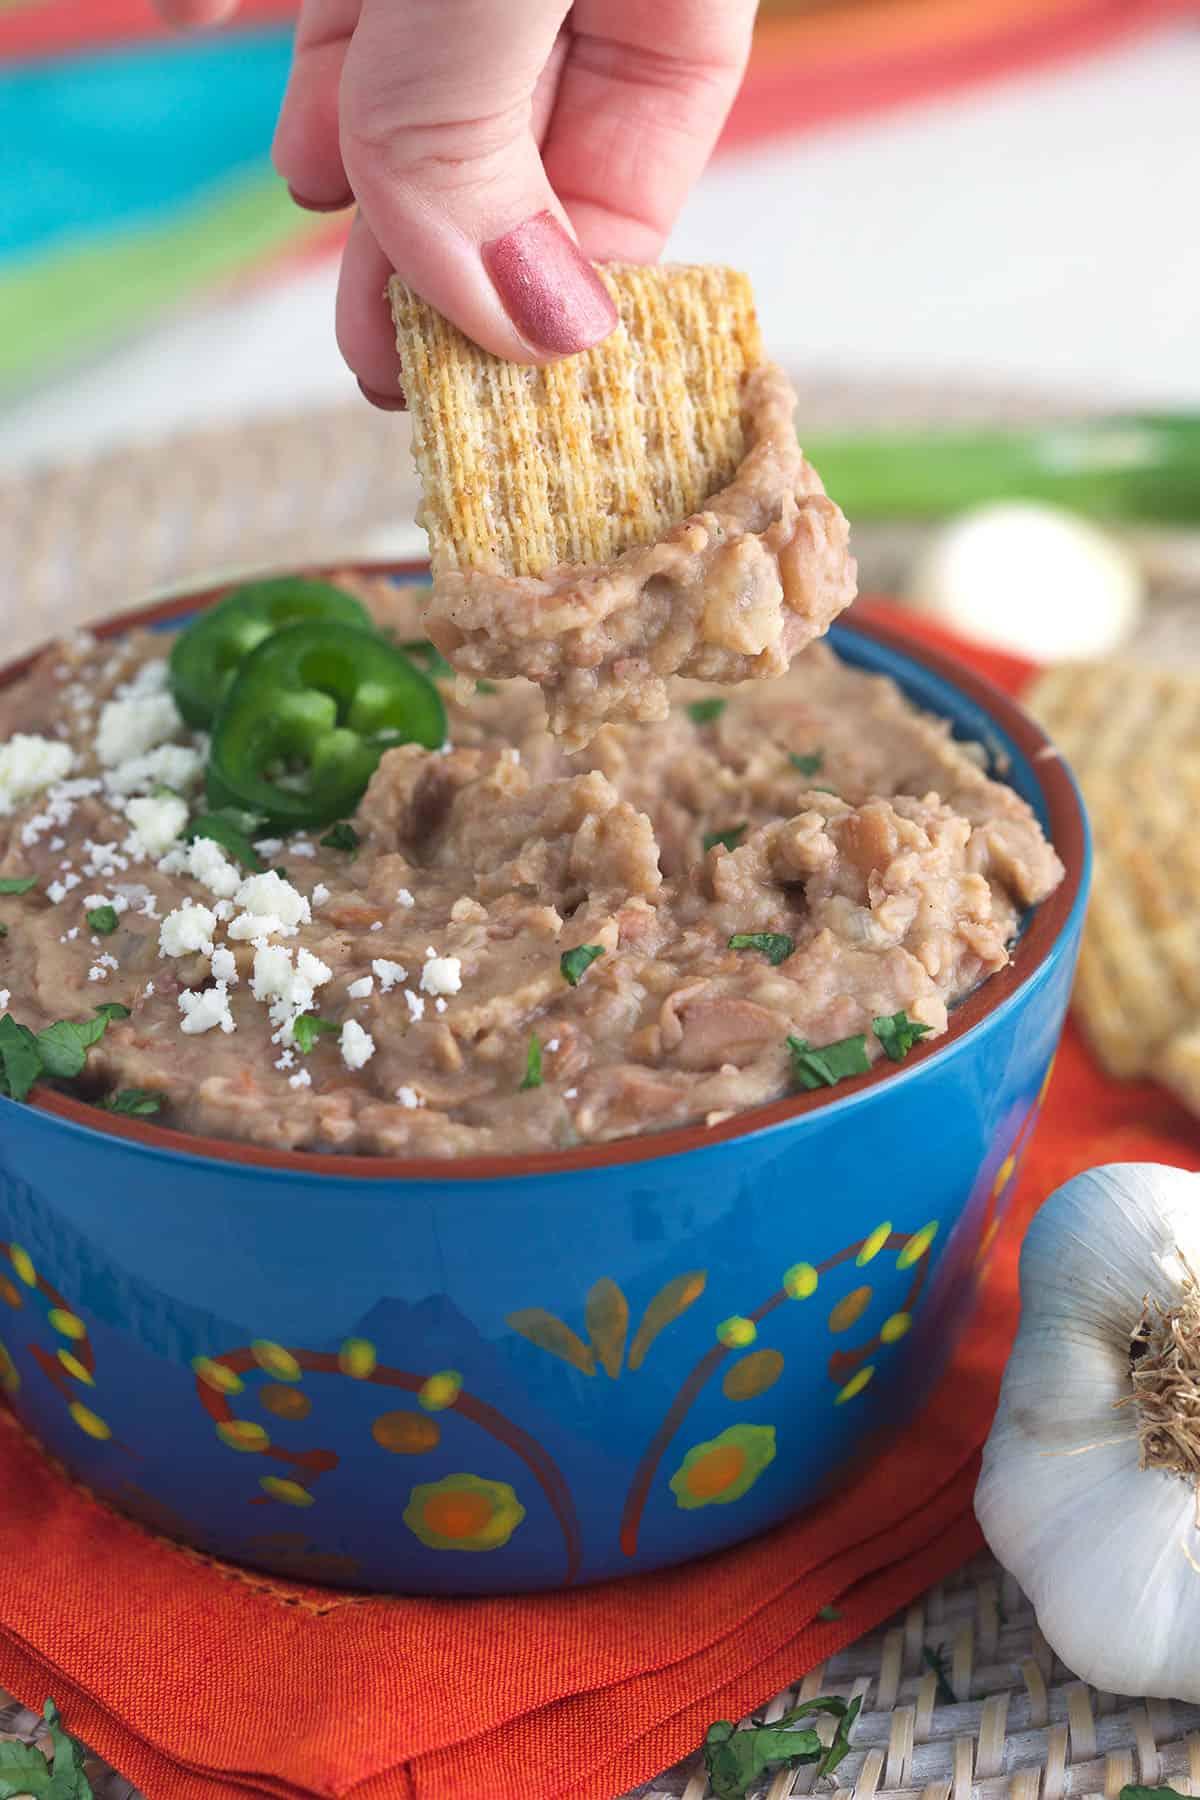 A cracker is being dipped into a bowl filled with refried beans.